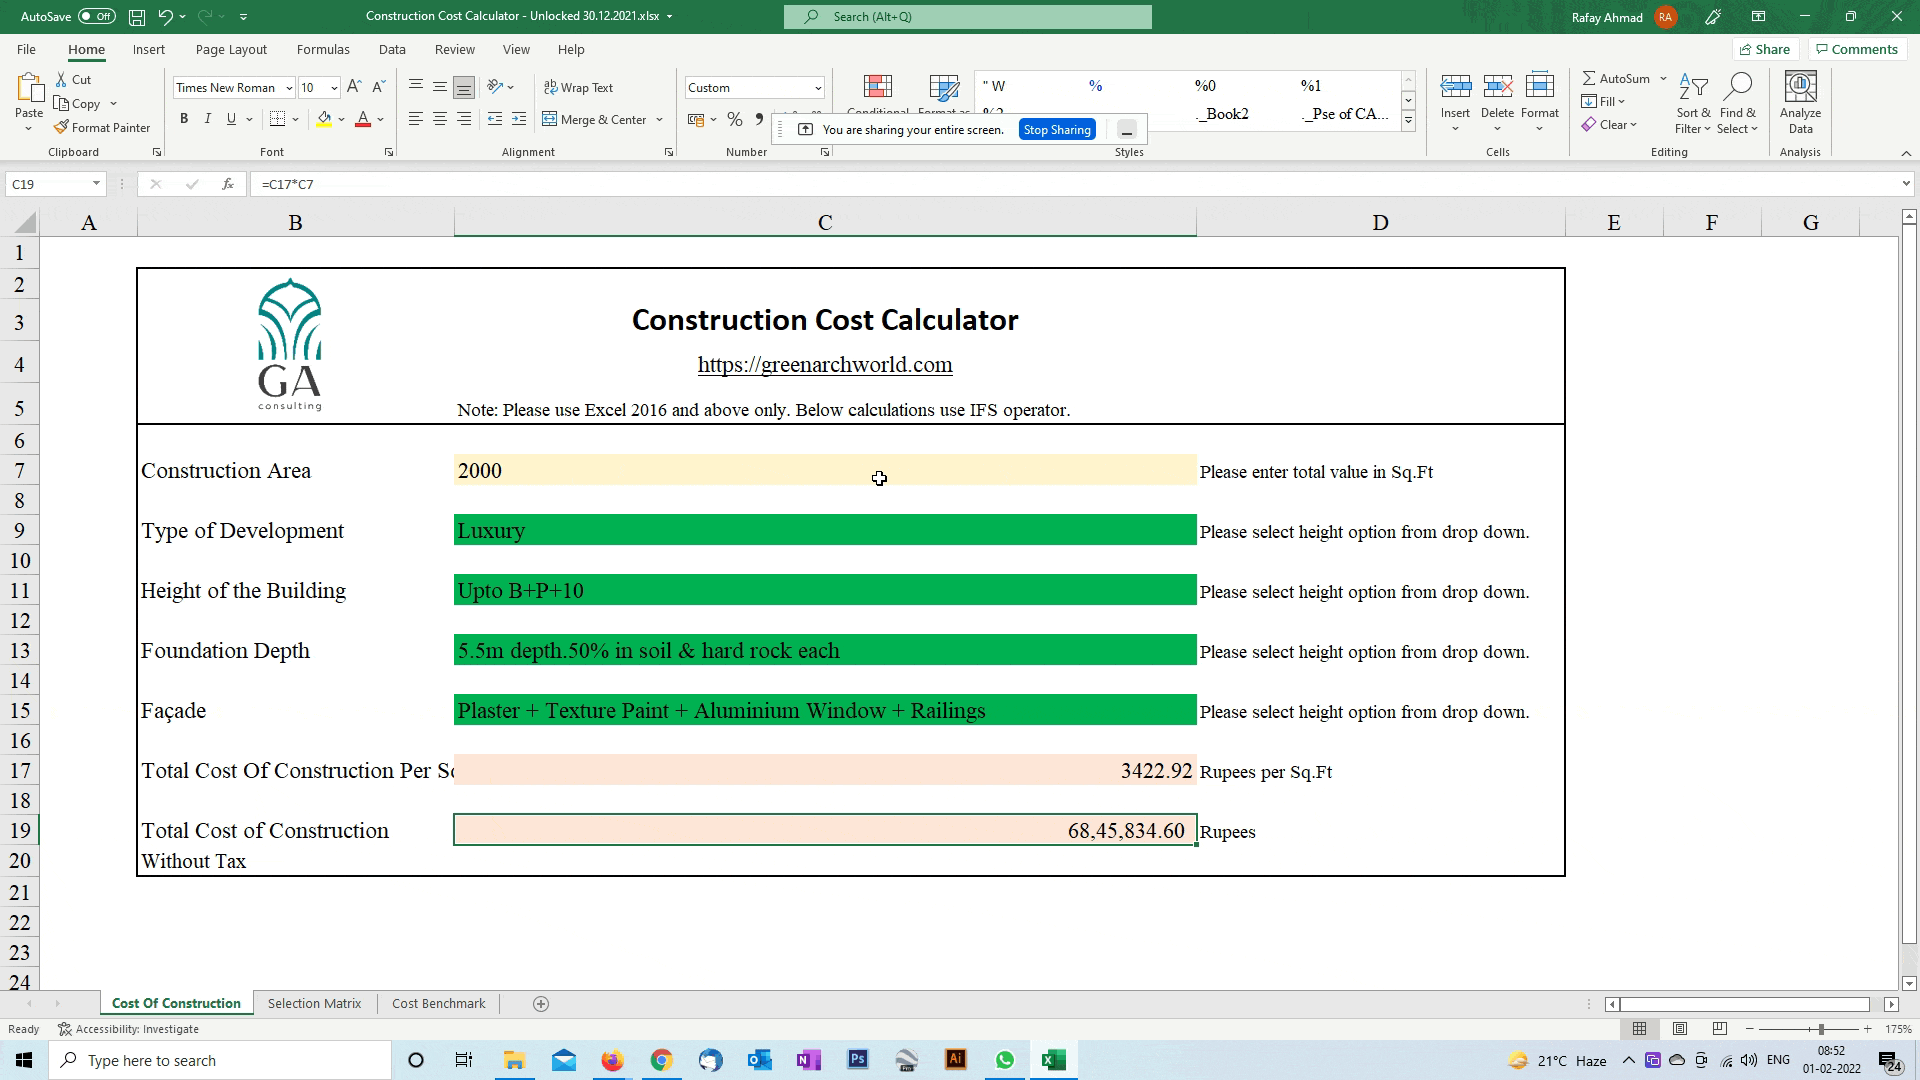 How to use construction cost calculator